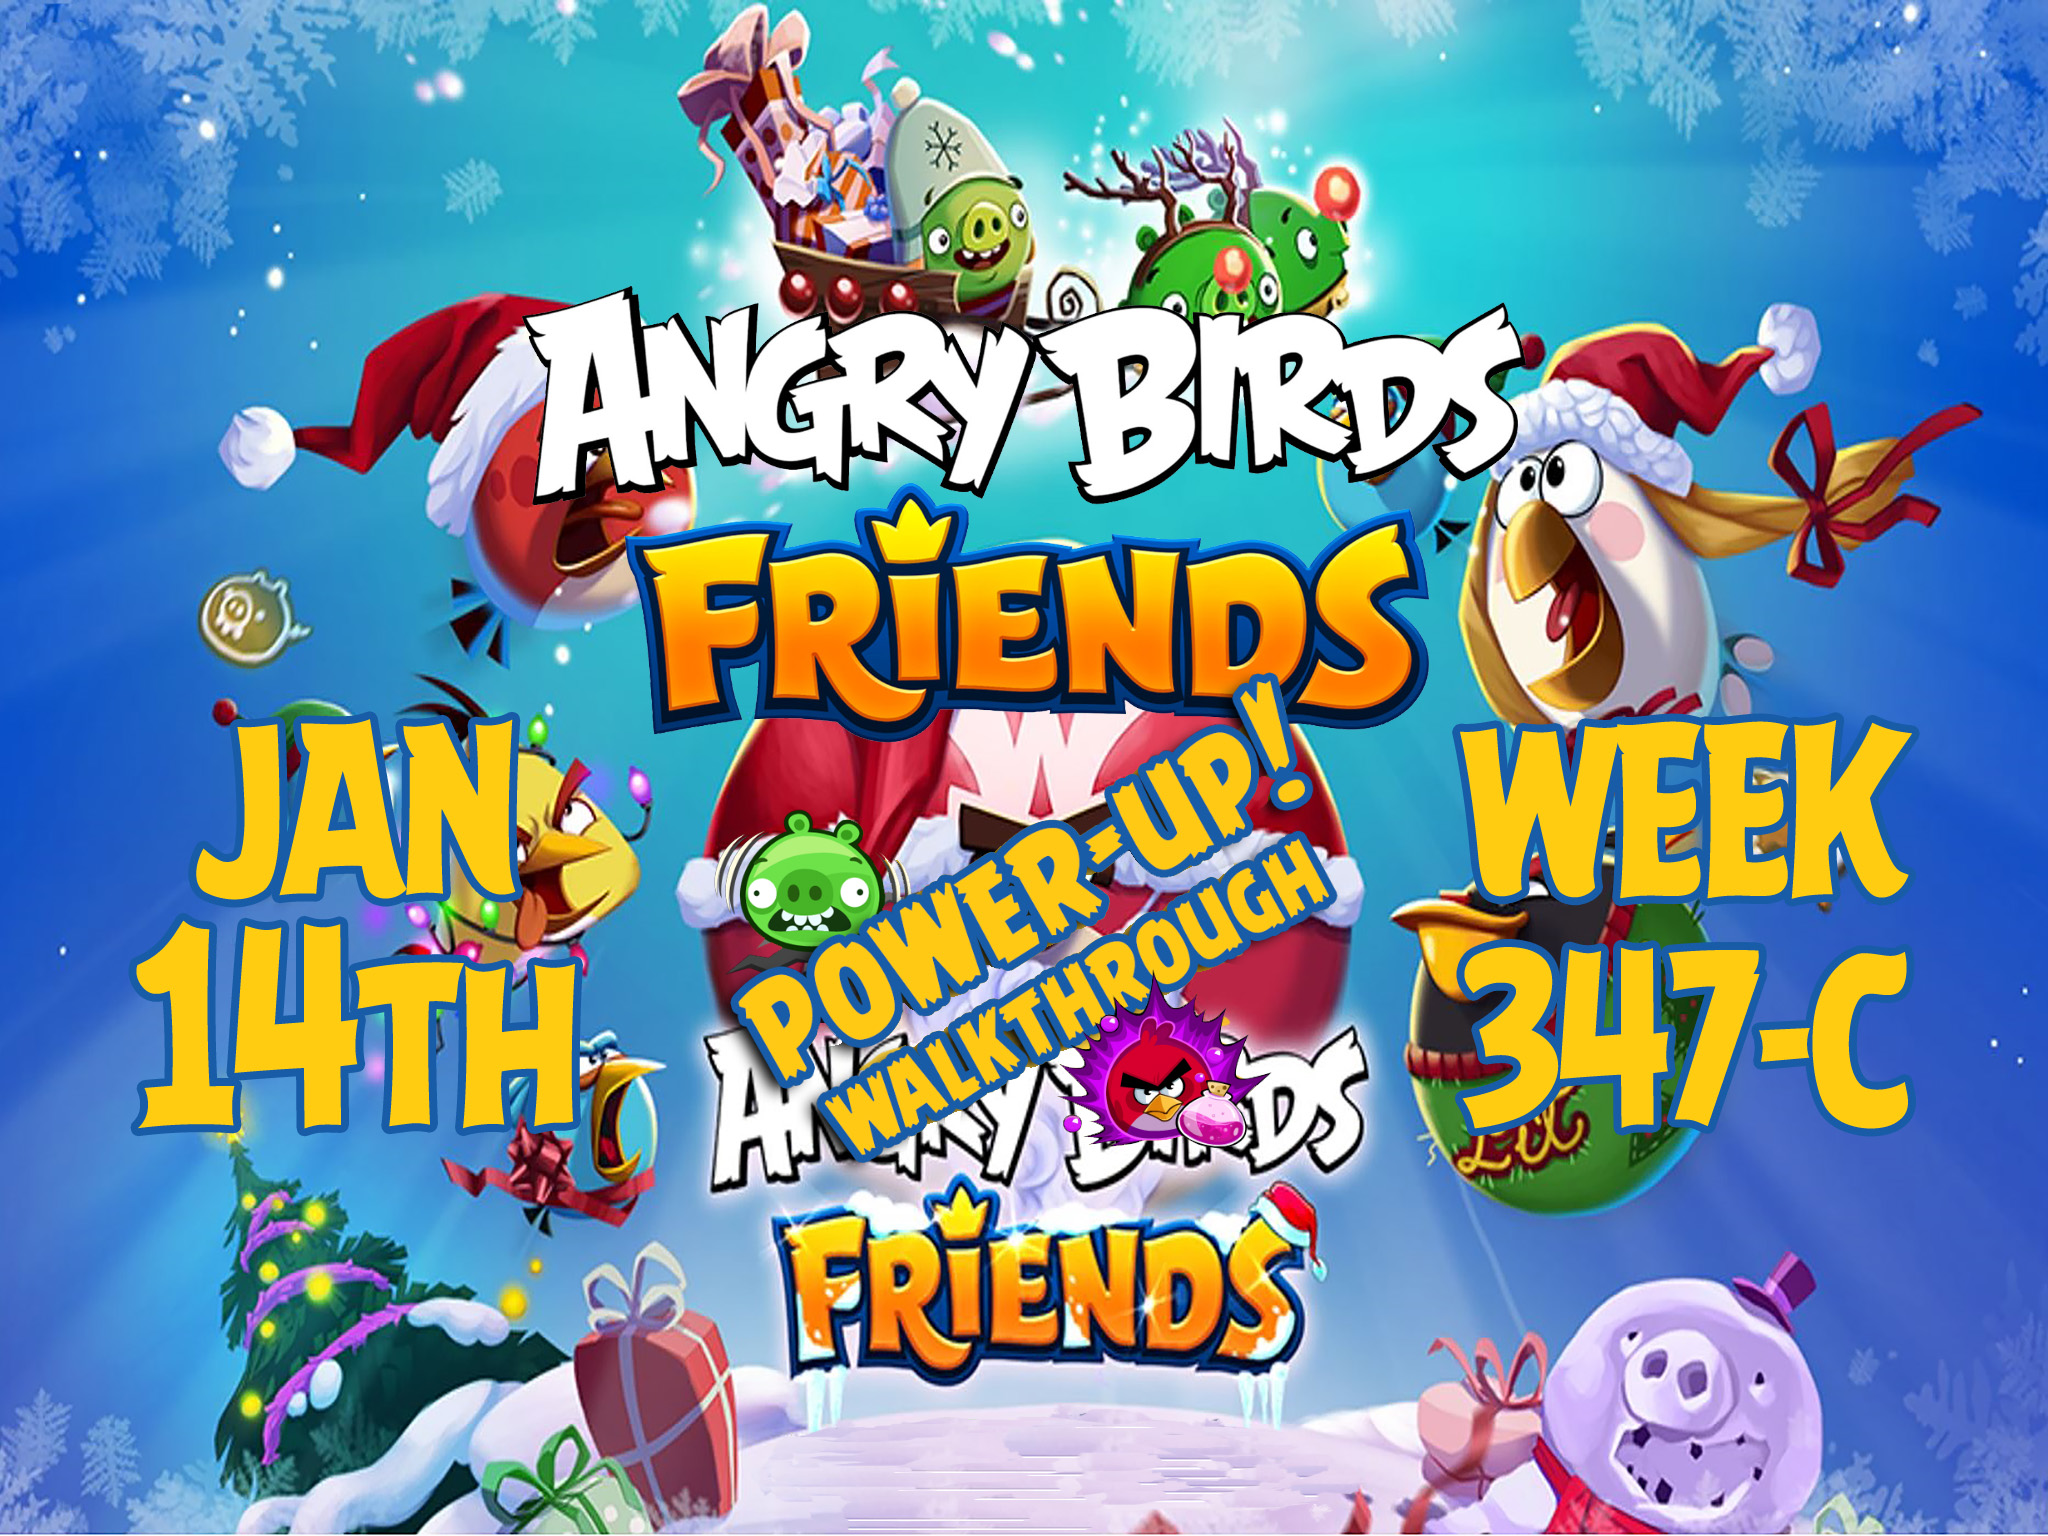 Angry-Birds-Friends-Tournament-Week-347-C-Feature-Image-PU